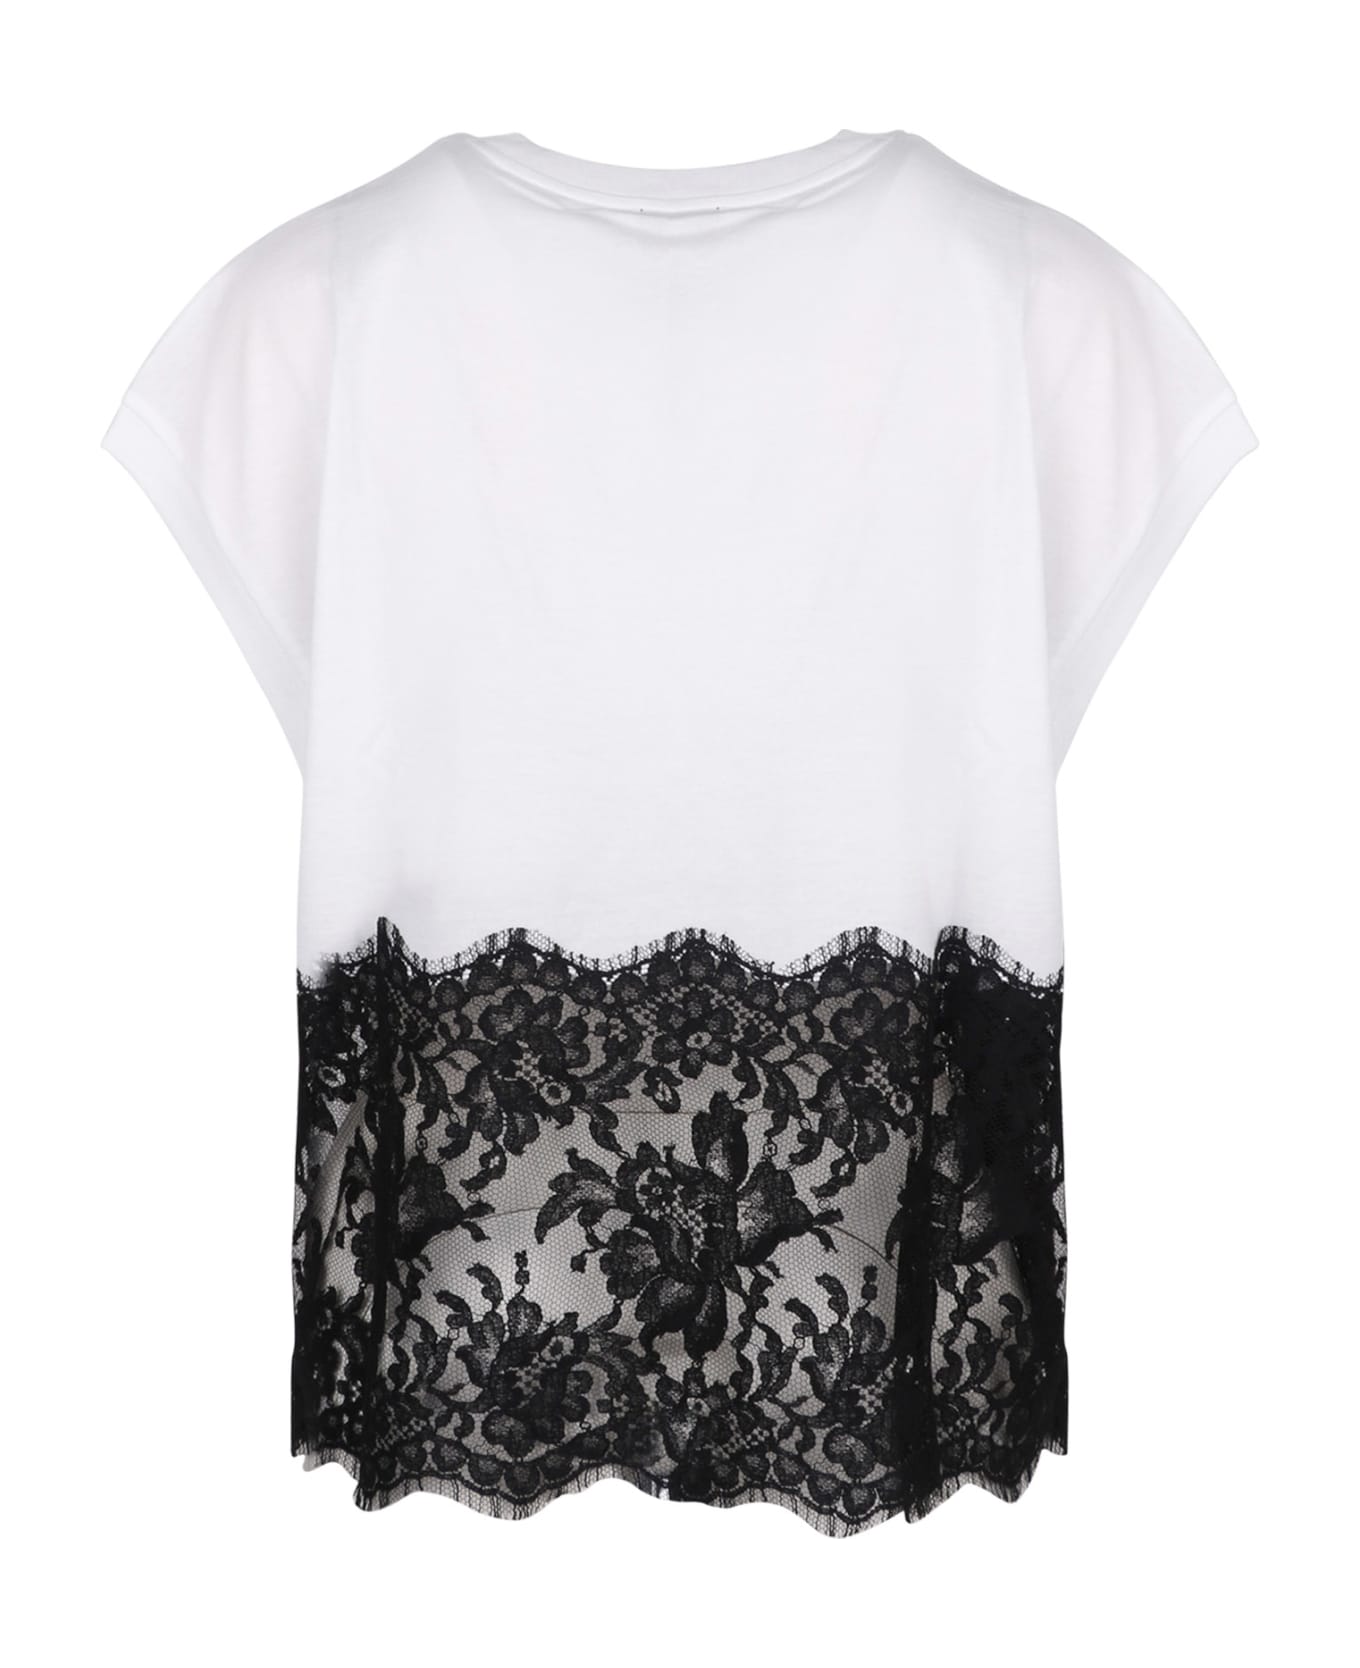 Dolce & Gabbana T-shirt With Lace Details